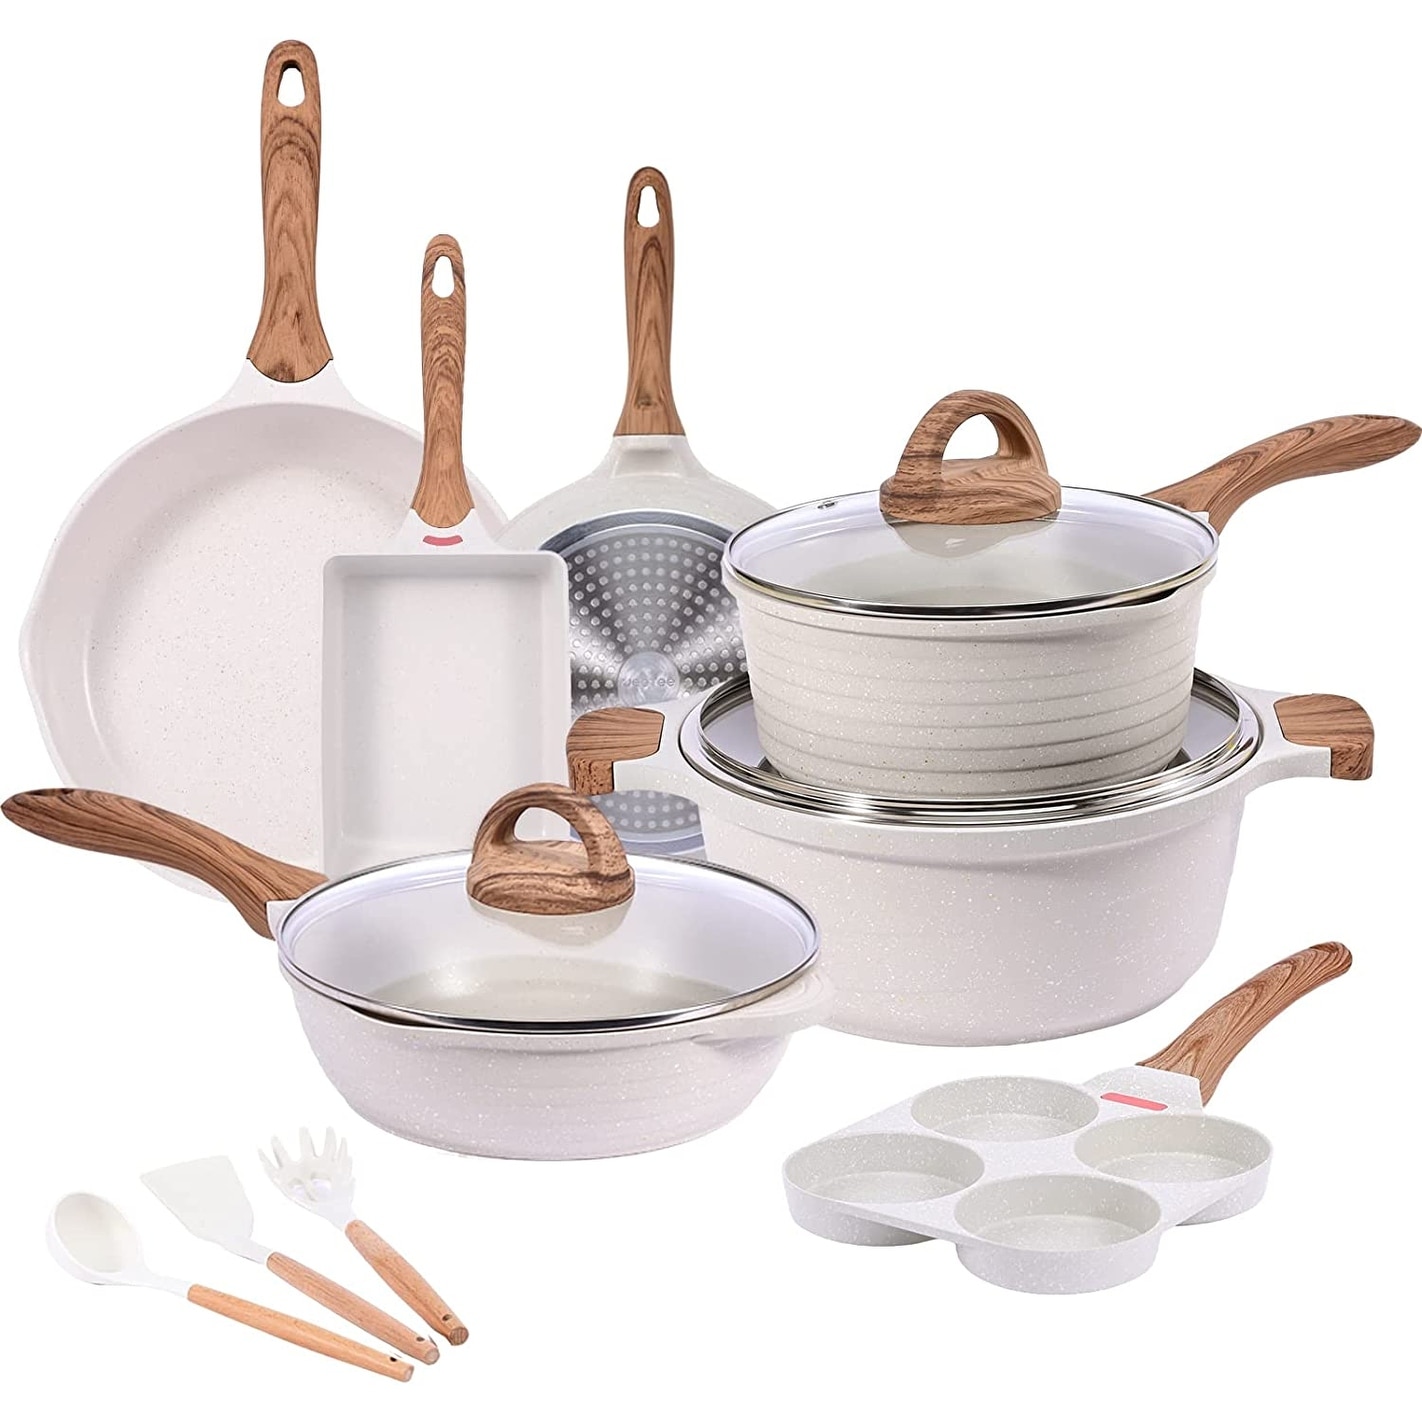 Vkoocy White Pots and Pans Set Non Stick, Ceramic Cookware Set Kitchen  Cooking Sets Induction Granite Pot and Pan w/Frying Pans, Saucepans,  Casserole